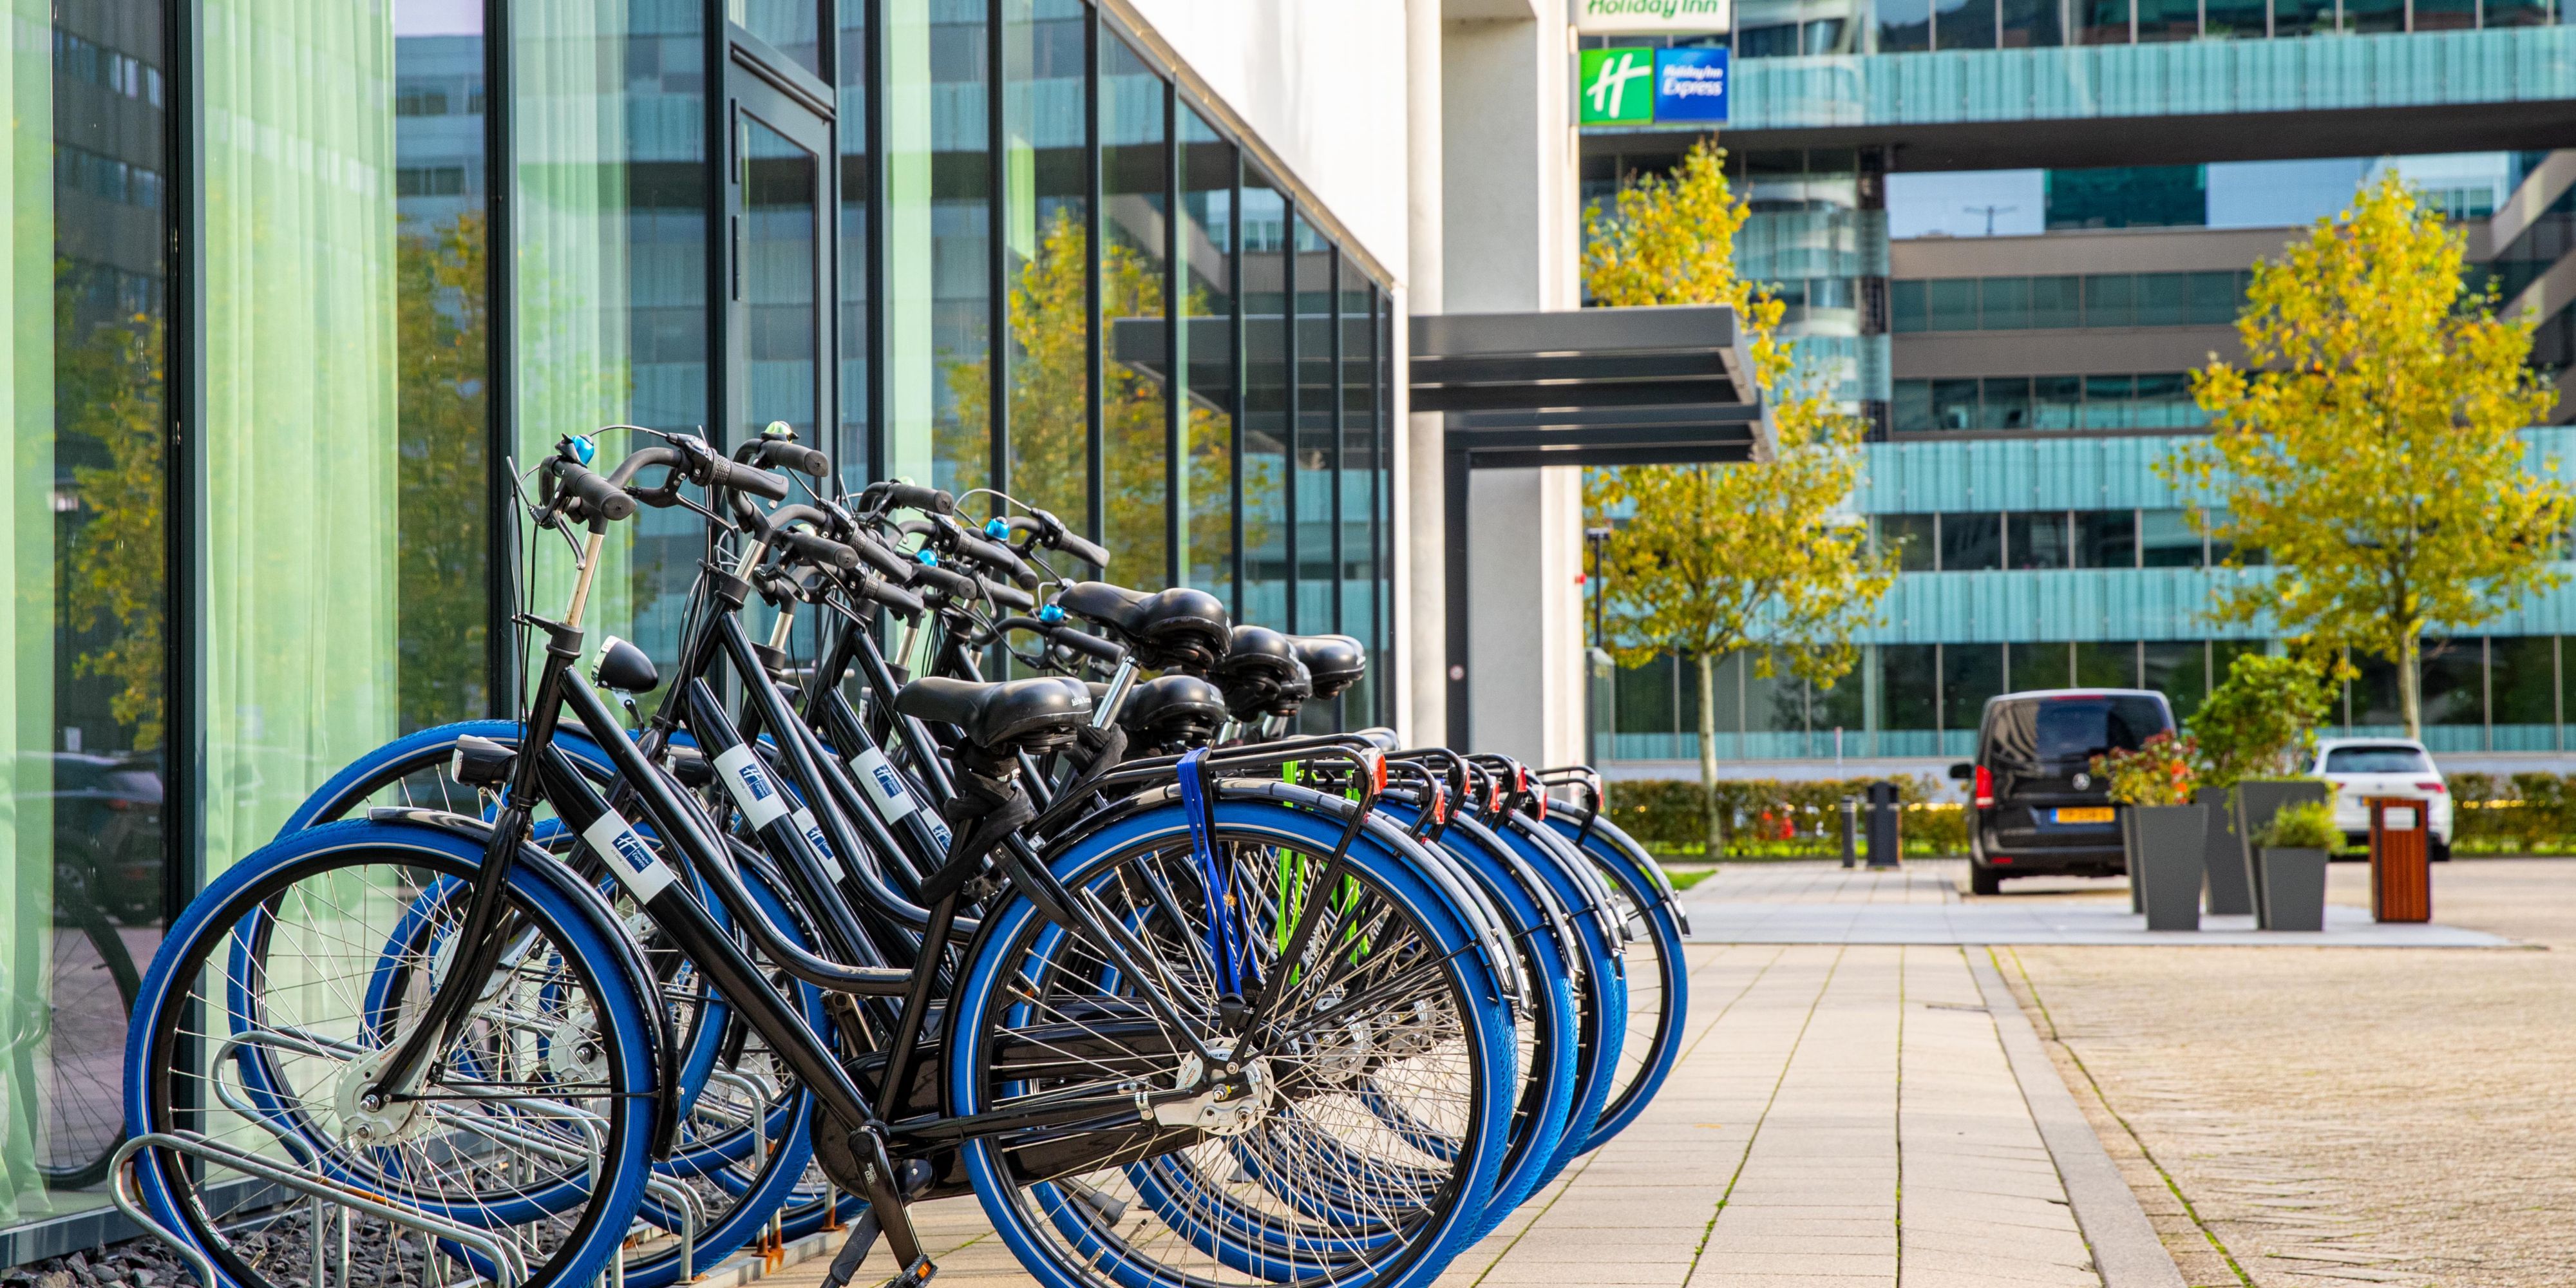 Explore the city of Amsterdam like a local in an eco-friendly, active way. Our bikes are available at our reception. To guarantee availablility, please reserve in advance.